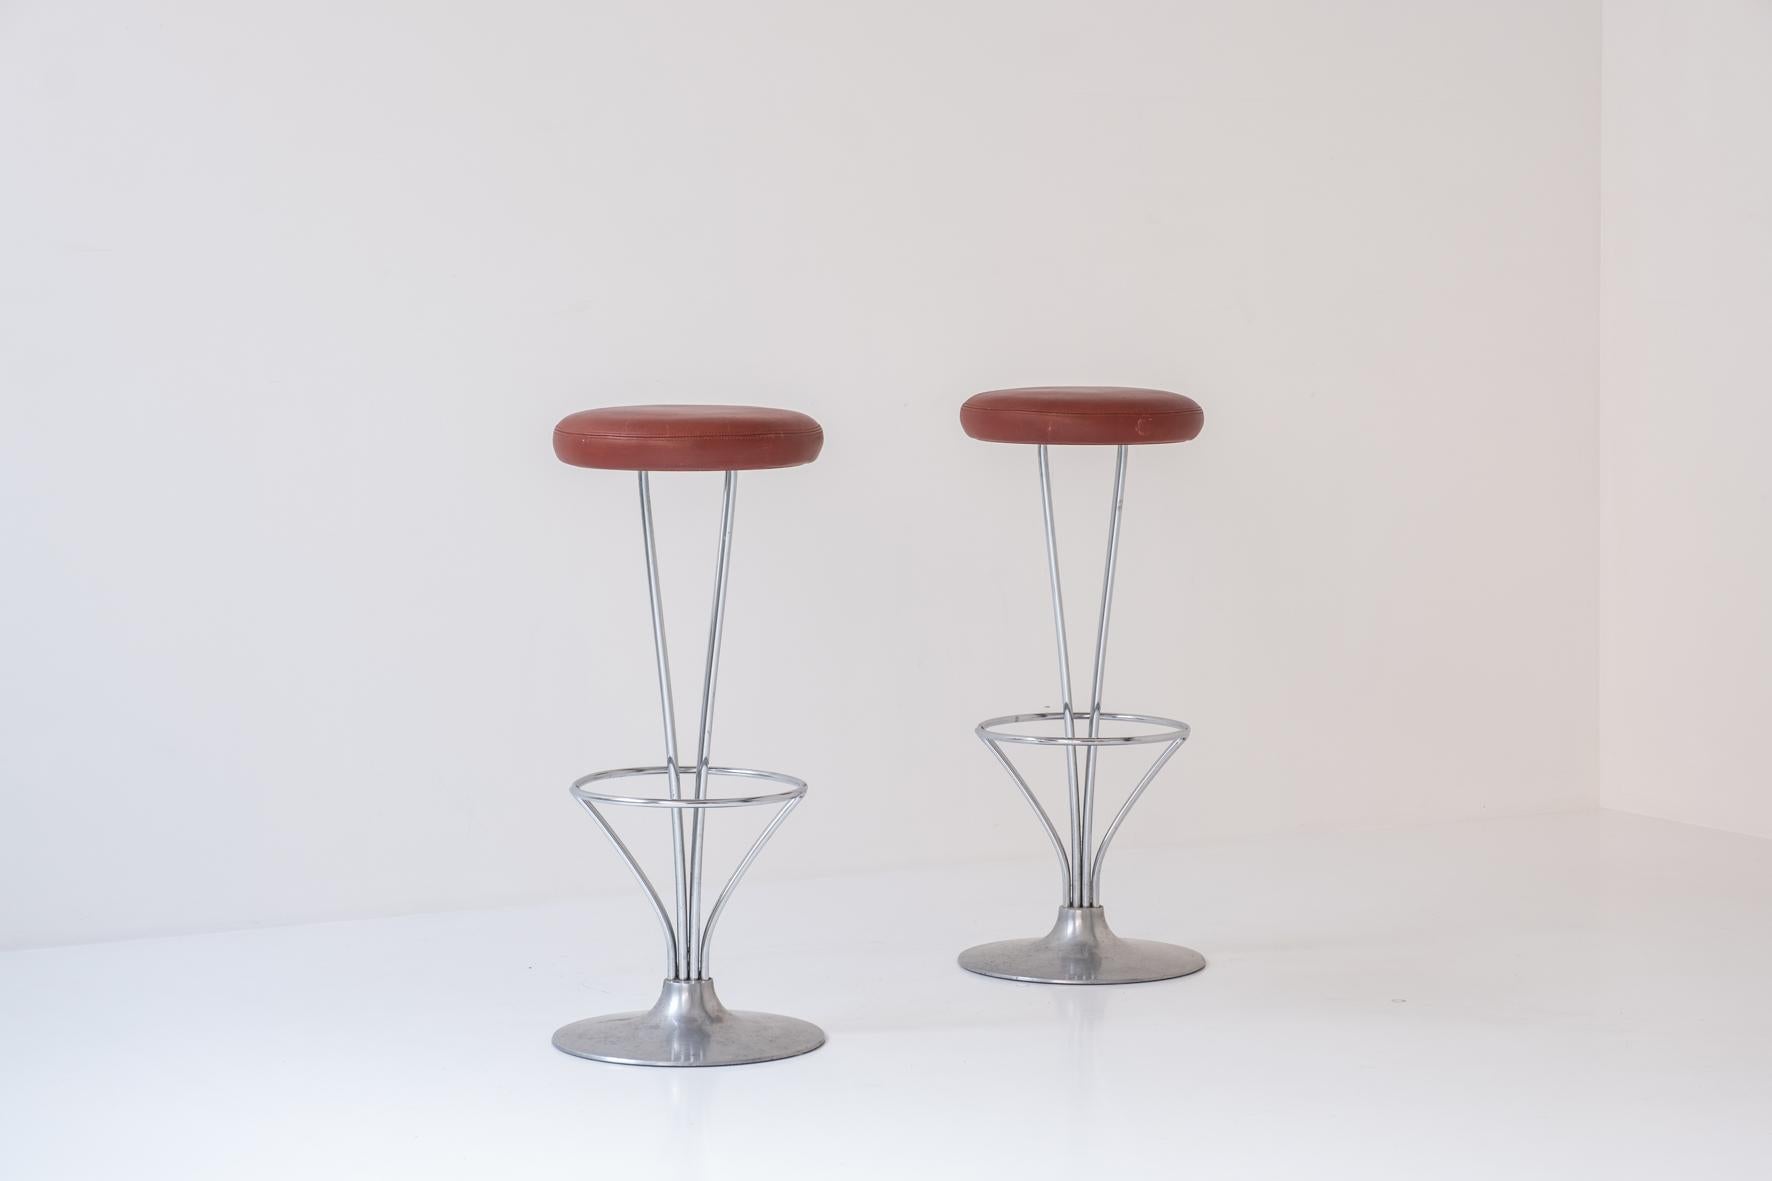 Lovely set of two bar stools by Piet Hein for Fritz Hansen, Denmark, 1960s. These stools have chrome-plated frames and a brushed aluminum base with its original leather upholstery. One of the best modern bar stool designs of the 20th century.